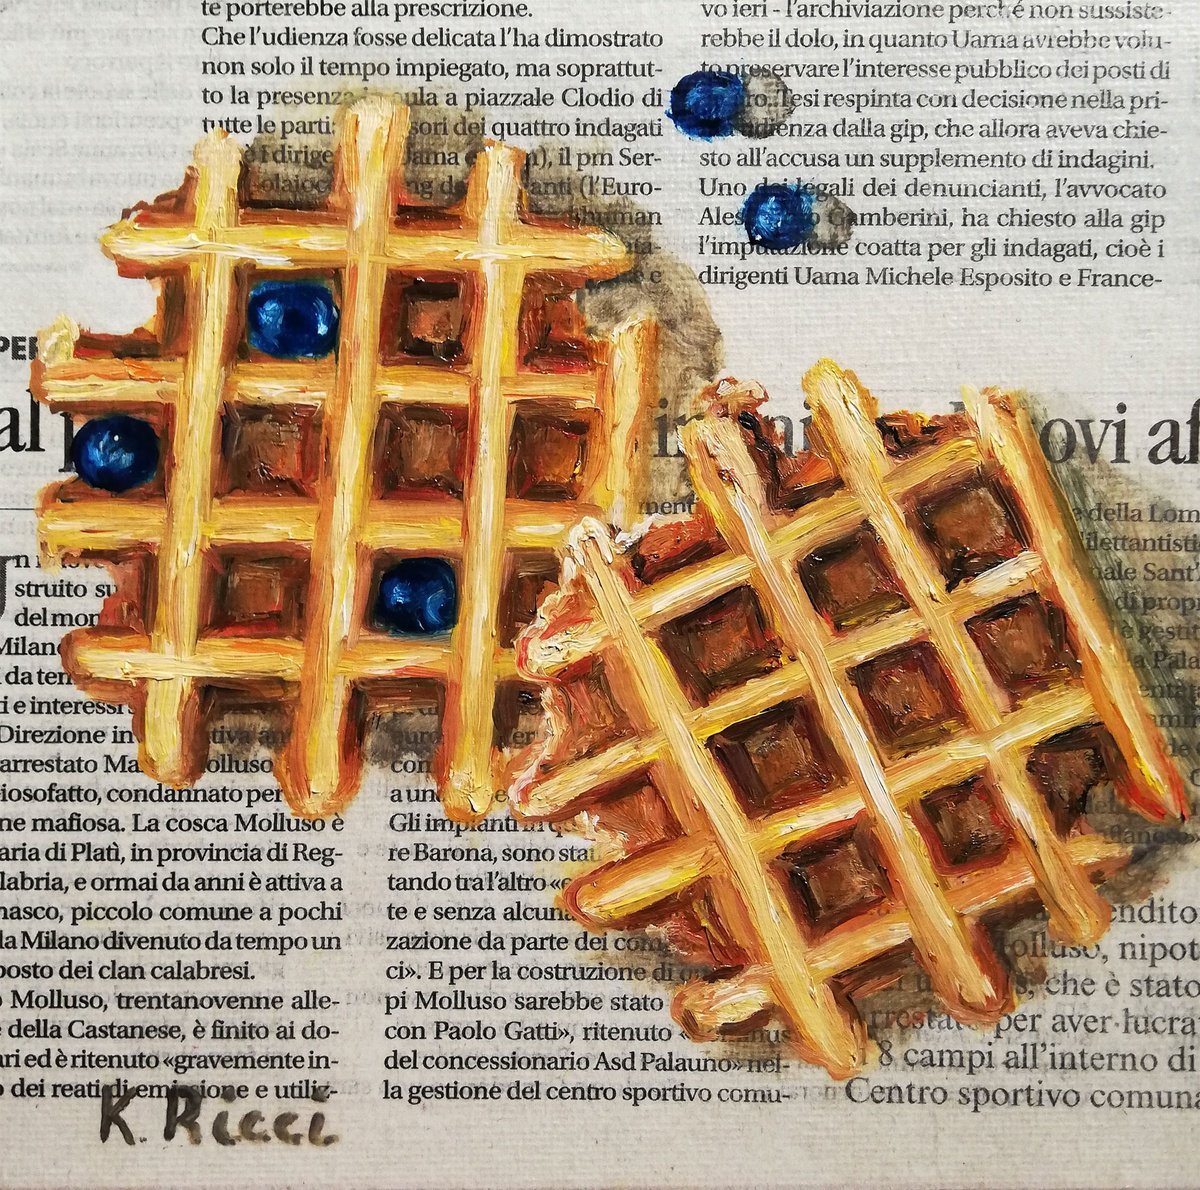 Waffels on Newspaper Original Oil on Canvas Board Painting 6 by 6 inches (15x15 cm) by Katia Ricci